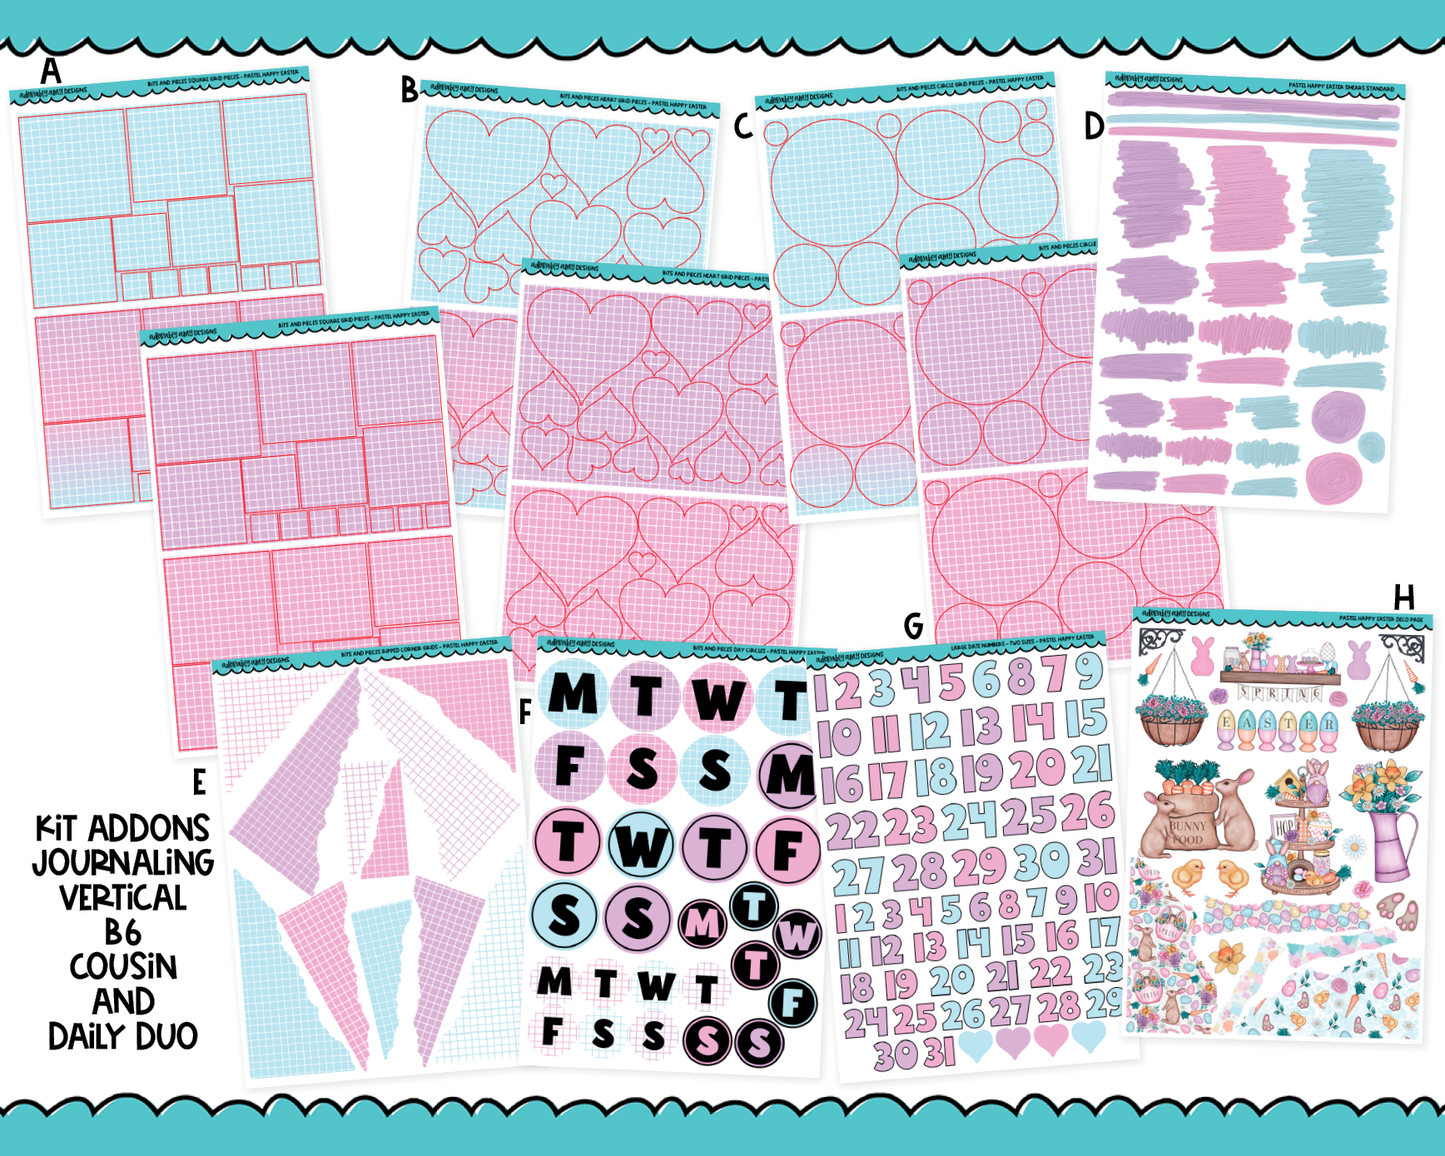 Daily Duo Pastel Happy Easter Themed Weekly Planner Sticker Kit for Daily Duo Planner